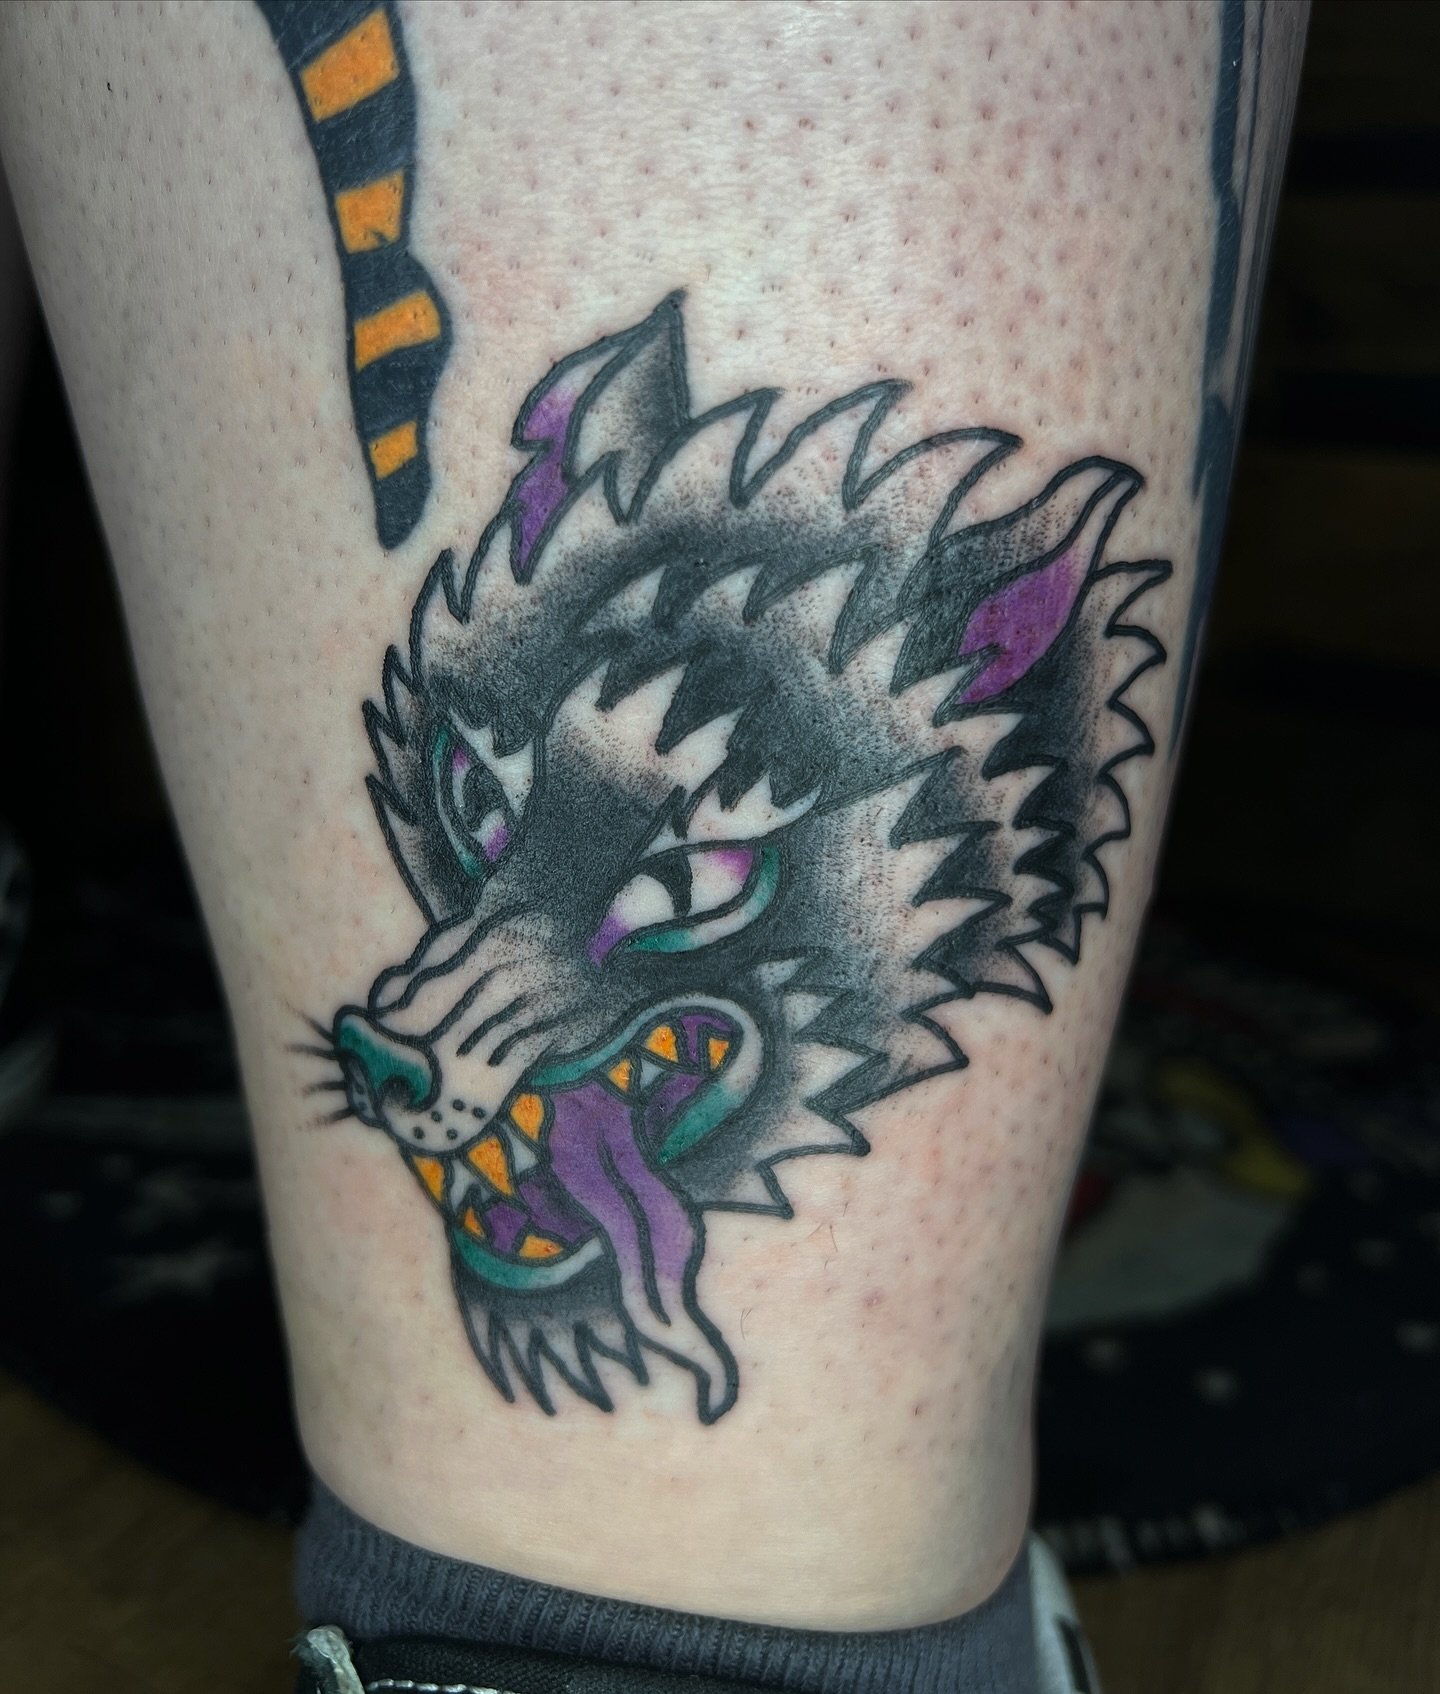 Traditional wolf tattoo from my flash. 
-
-
-
-
-
-
-
-
-
-
-
-
-
#wolftattoo #traditionalwolftattoo #oldschooltattoo #traditionaltattoos #traditionaltattoo #brightandbold #realtraditional #tradworkers #bright_and_bold #traditionaltattooing #traditio